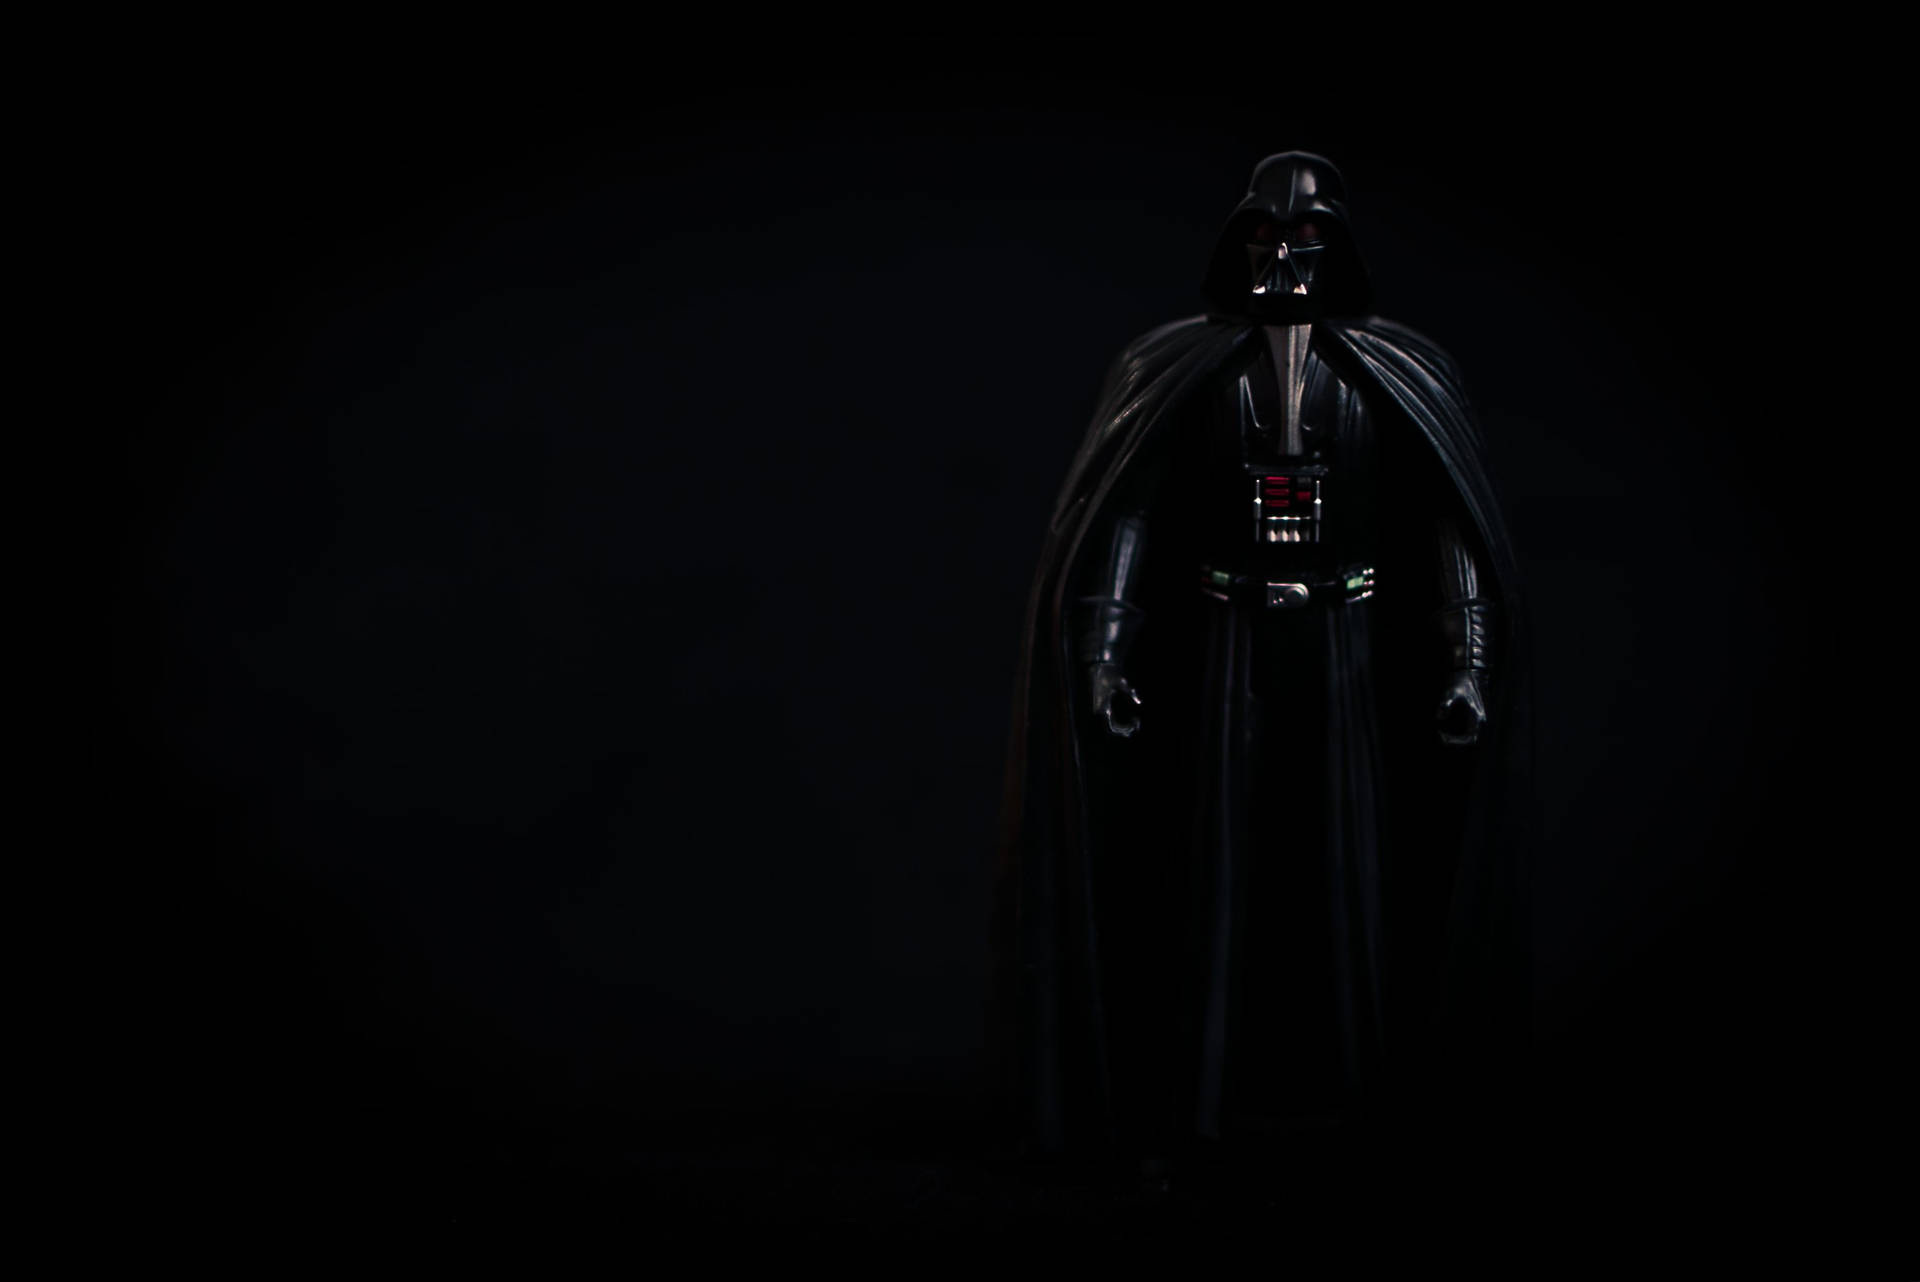 Sith Lord Darth Vader looms in the darkness Wallpaper